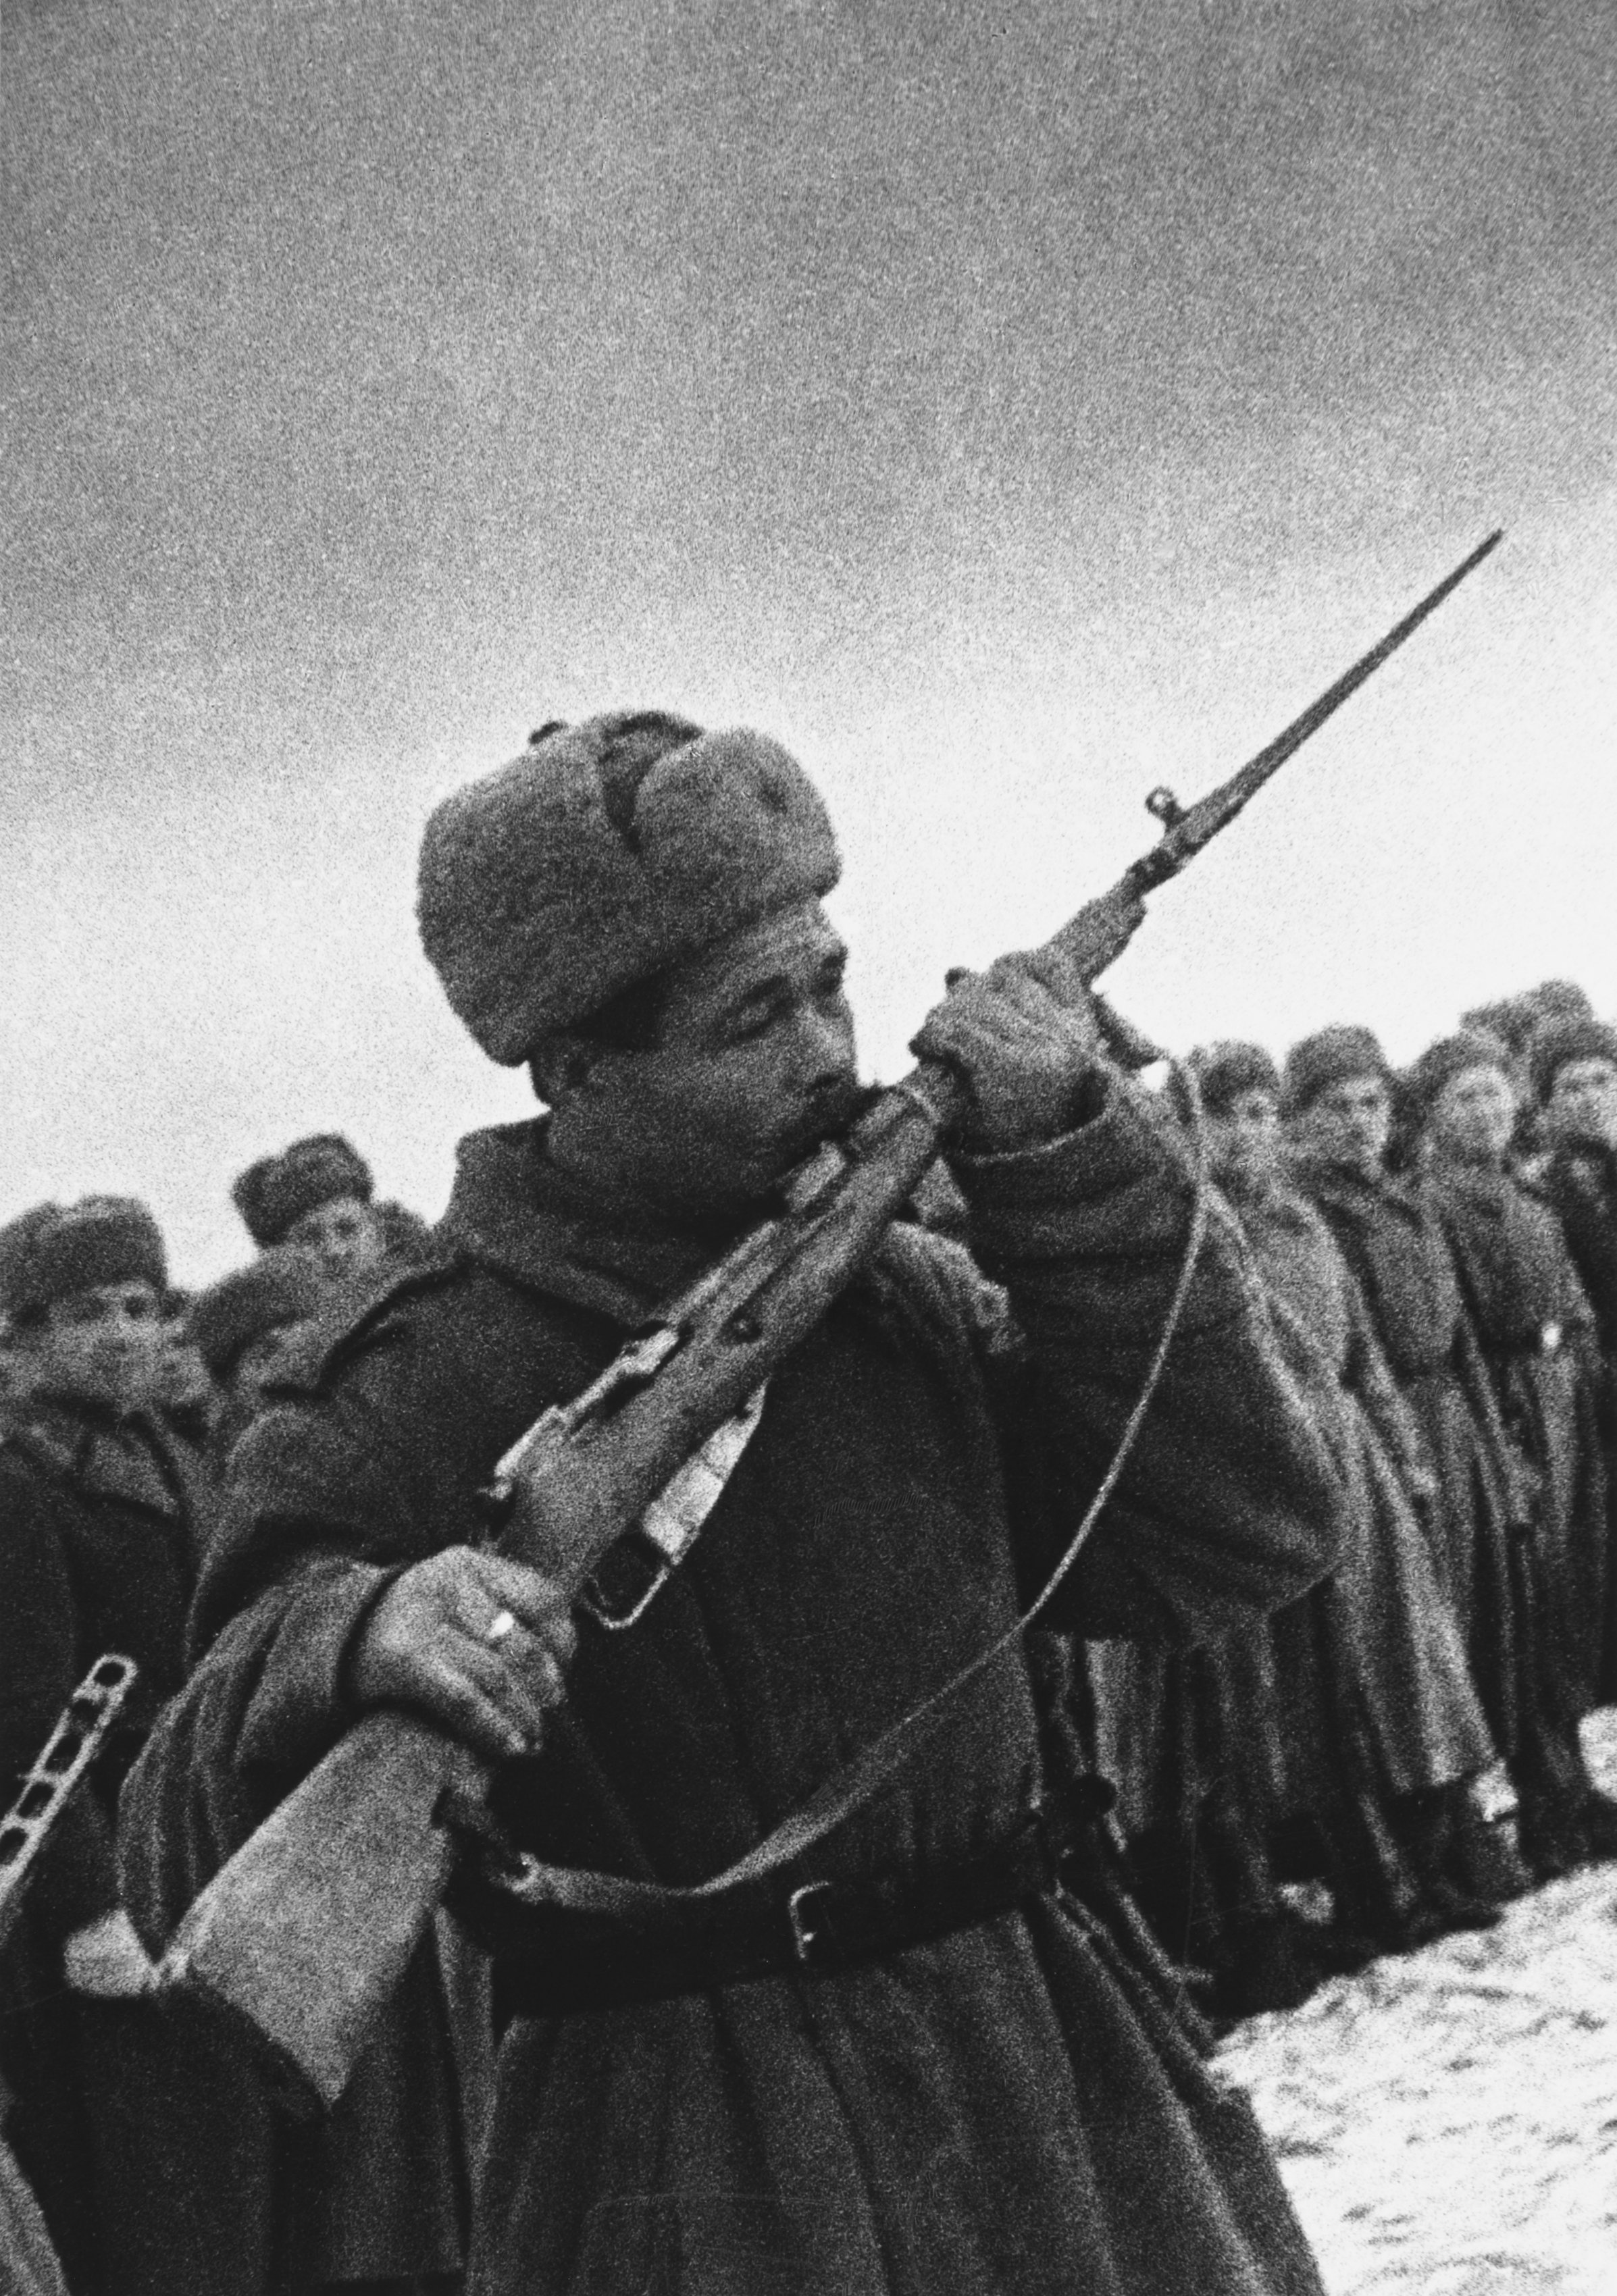 The Oath of War (Soviet Soldier Kissing His Rifle)